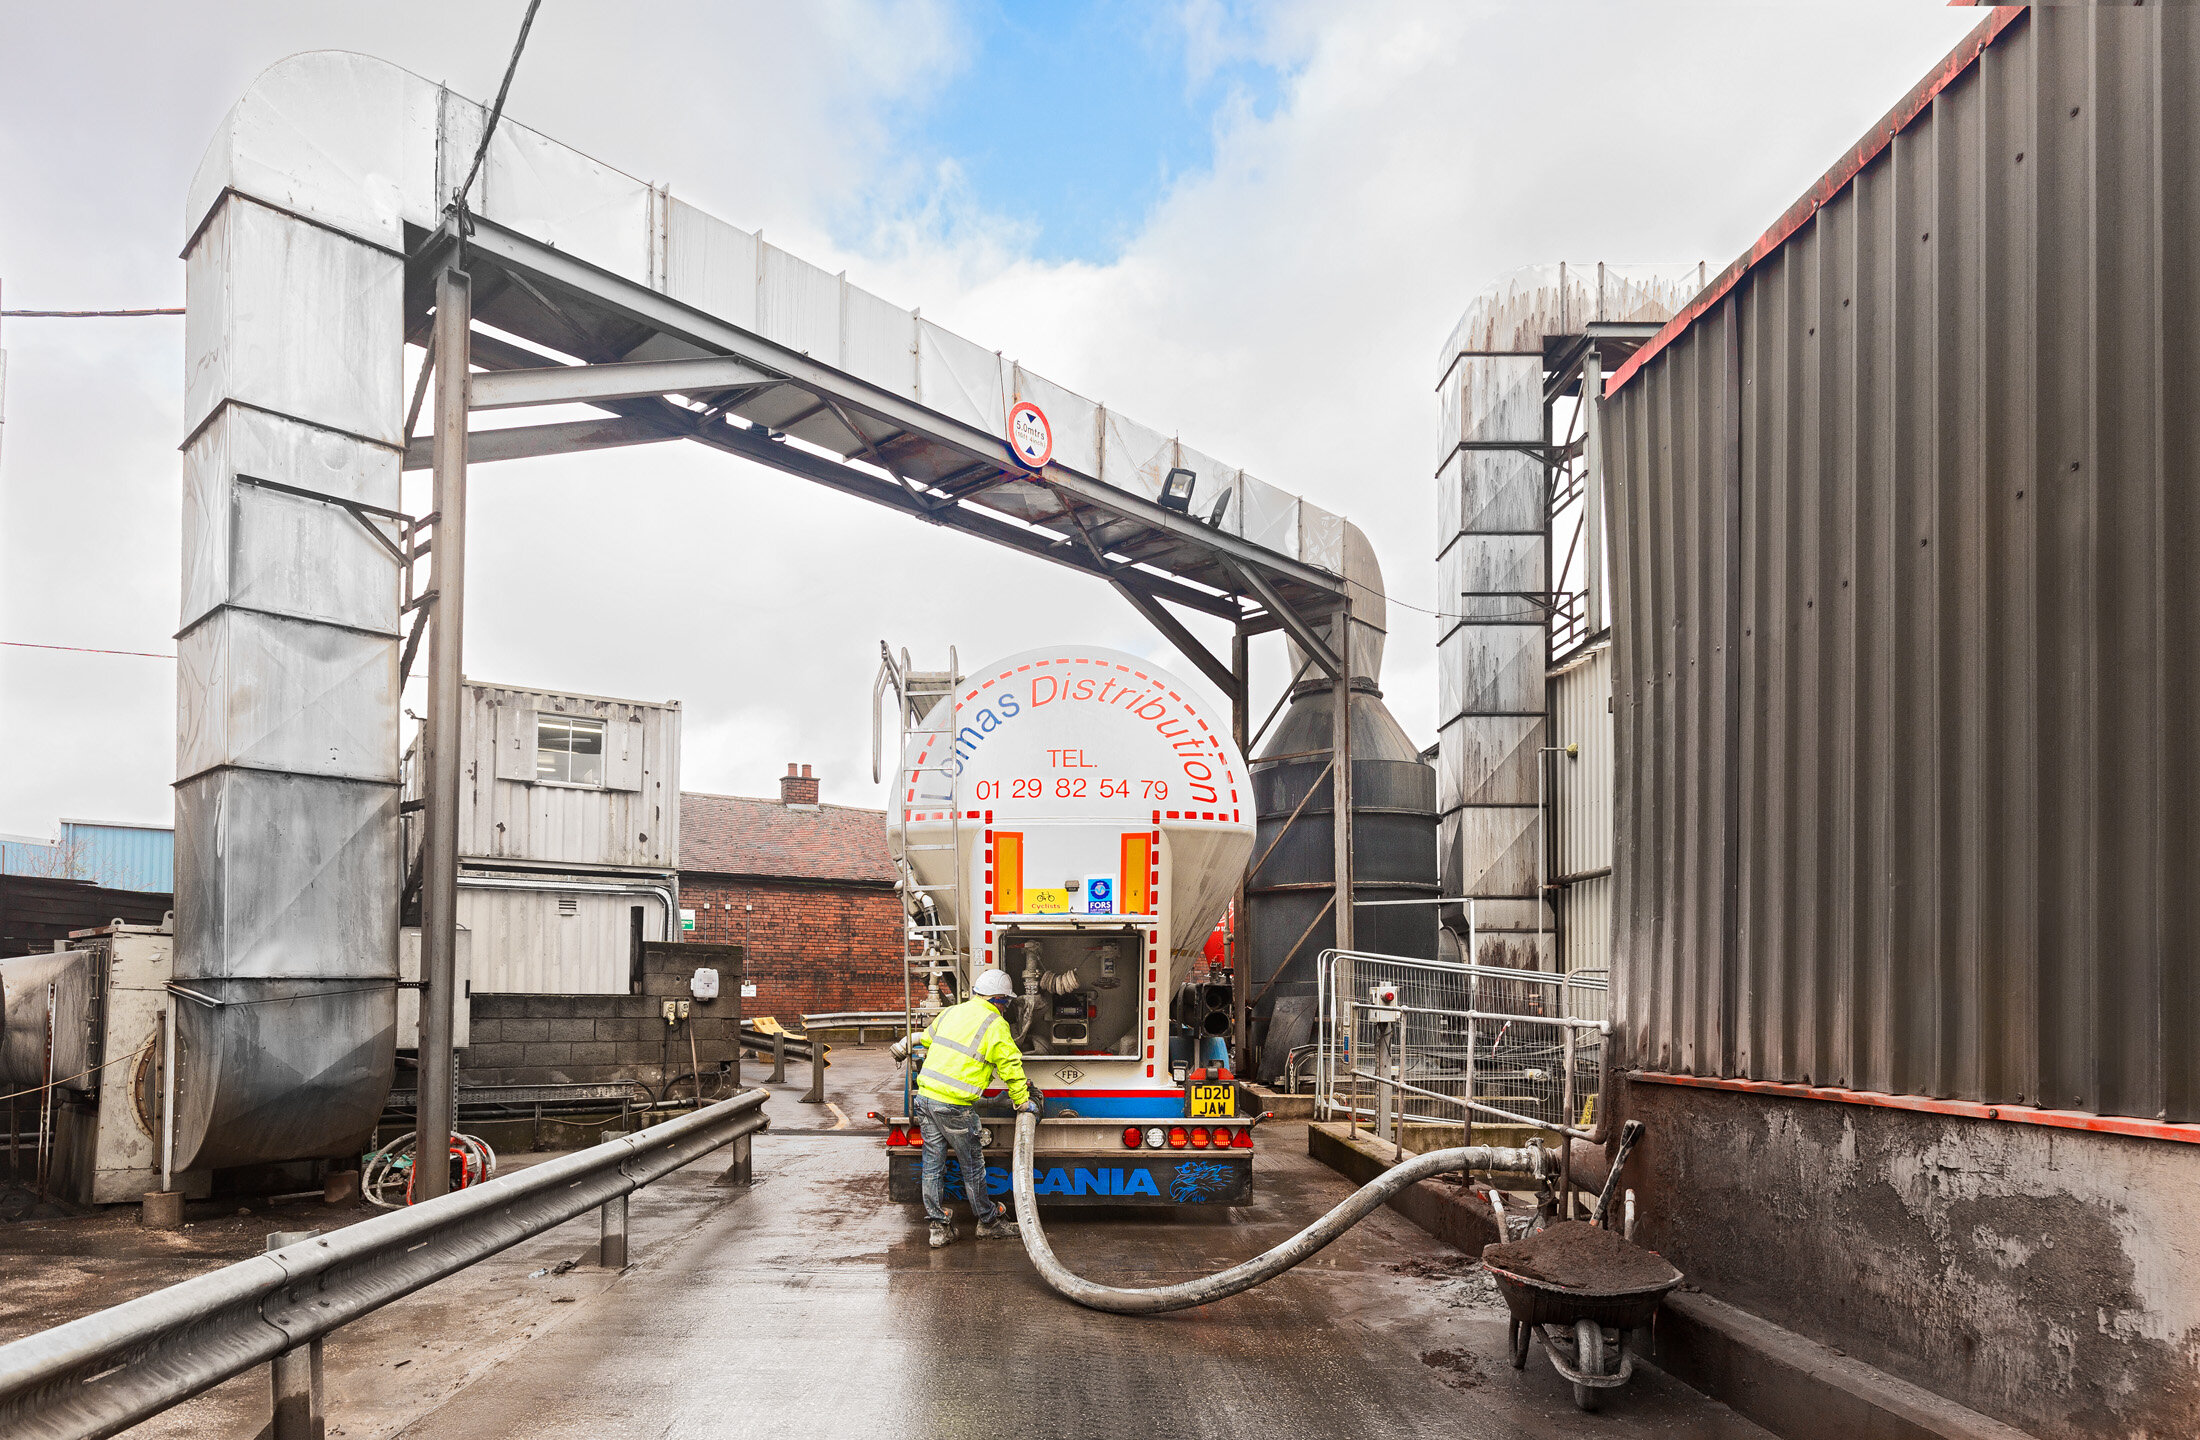 Grey lorry tanker with collected liquid waste for treatment at a UK hazardous waste management company in Derbyshire